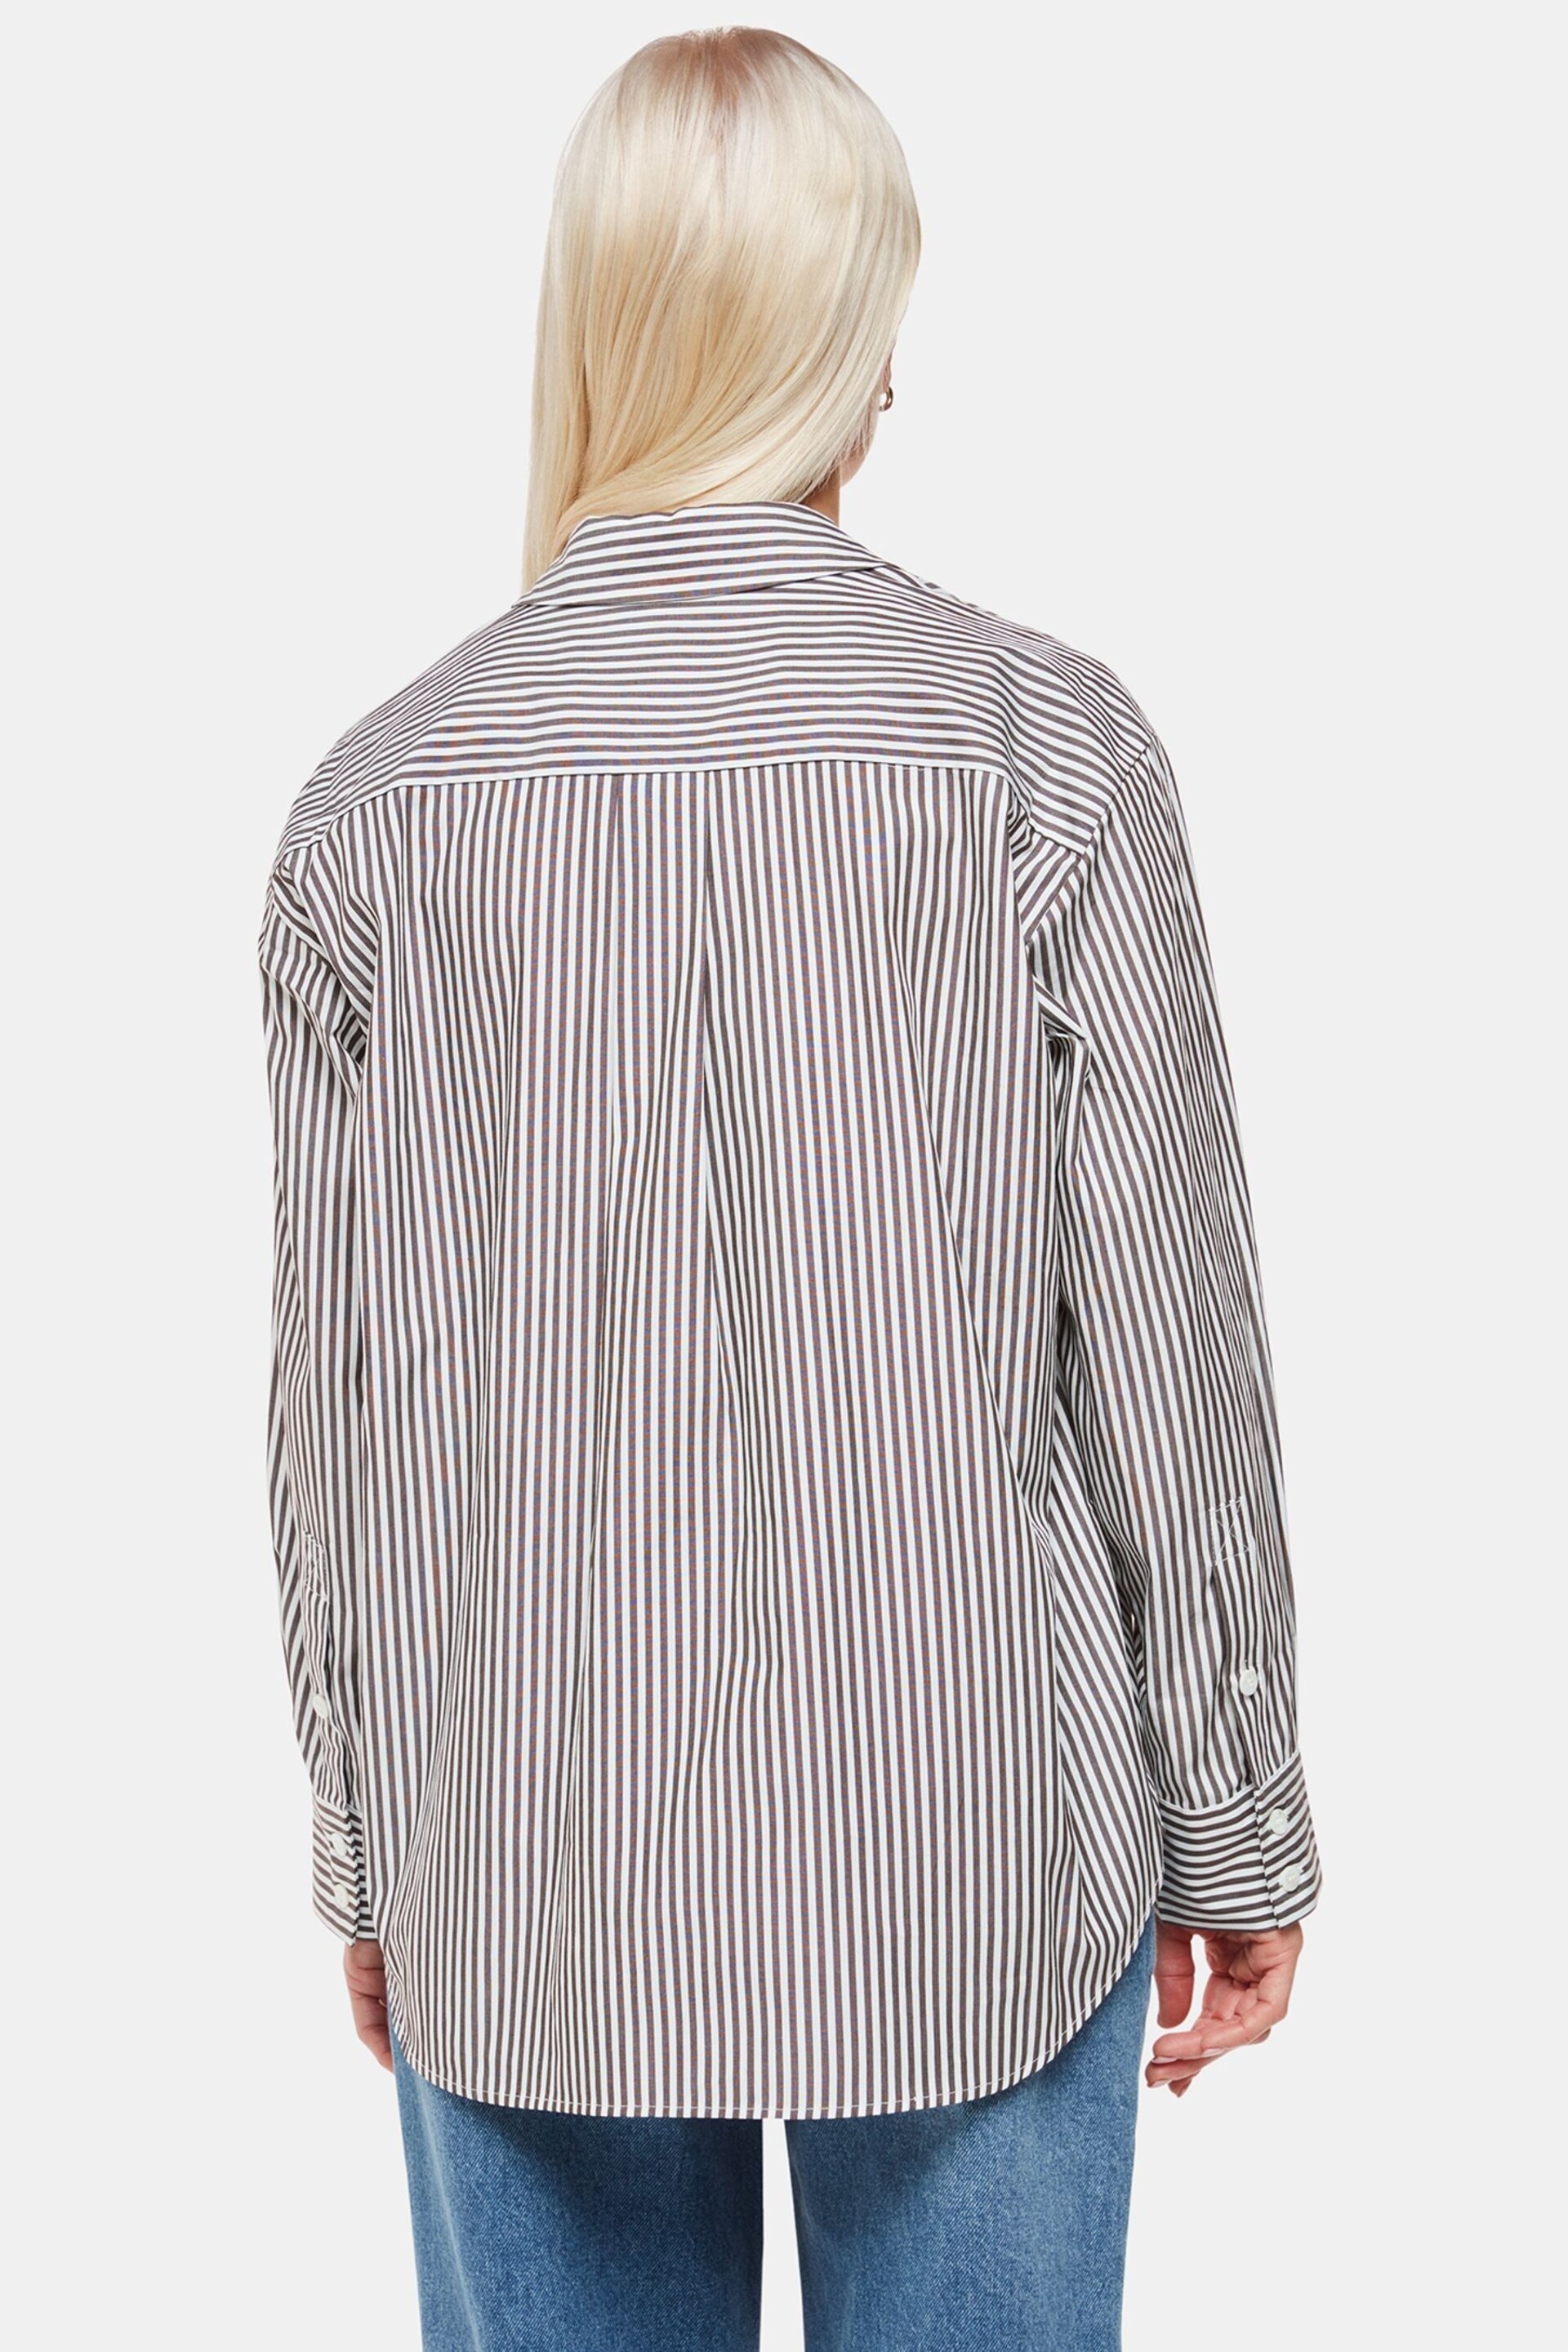 Whistles Petite Black/White Relaxed Fit Stripe Shirt - Image 2 of 5